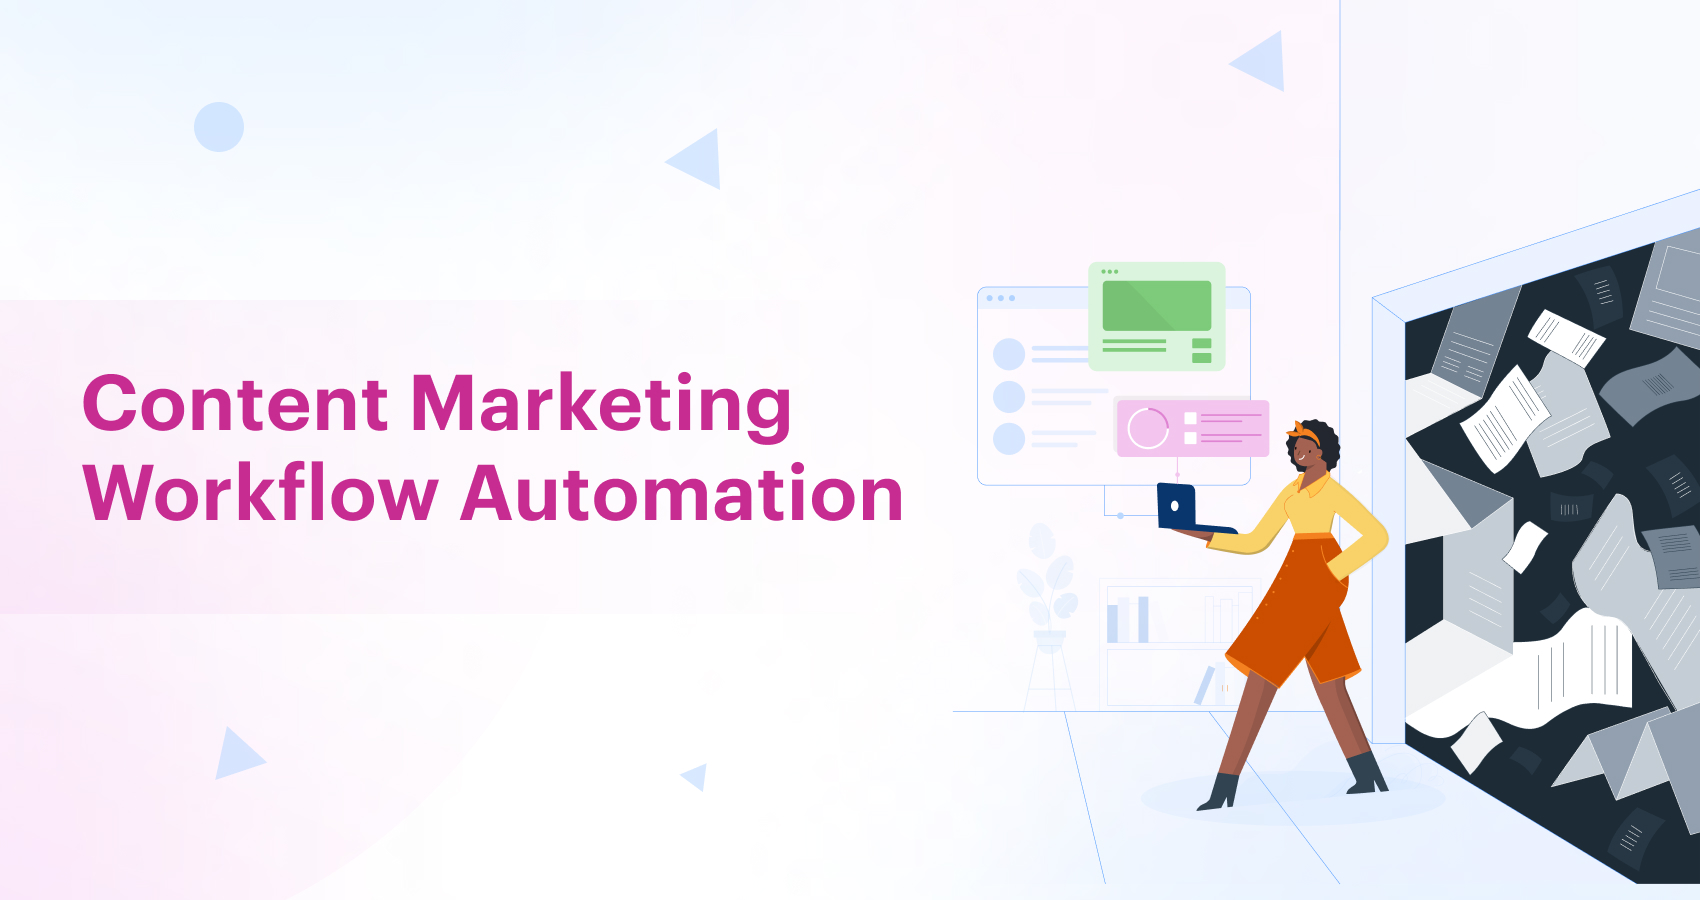 Content Marketing Workflow Automation